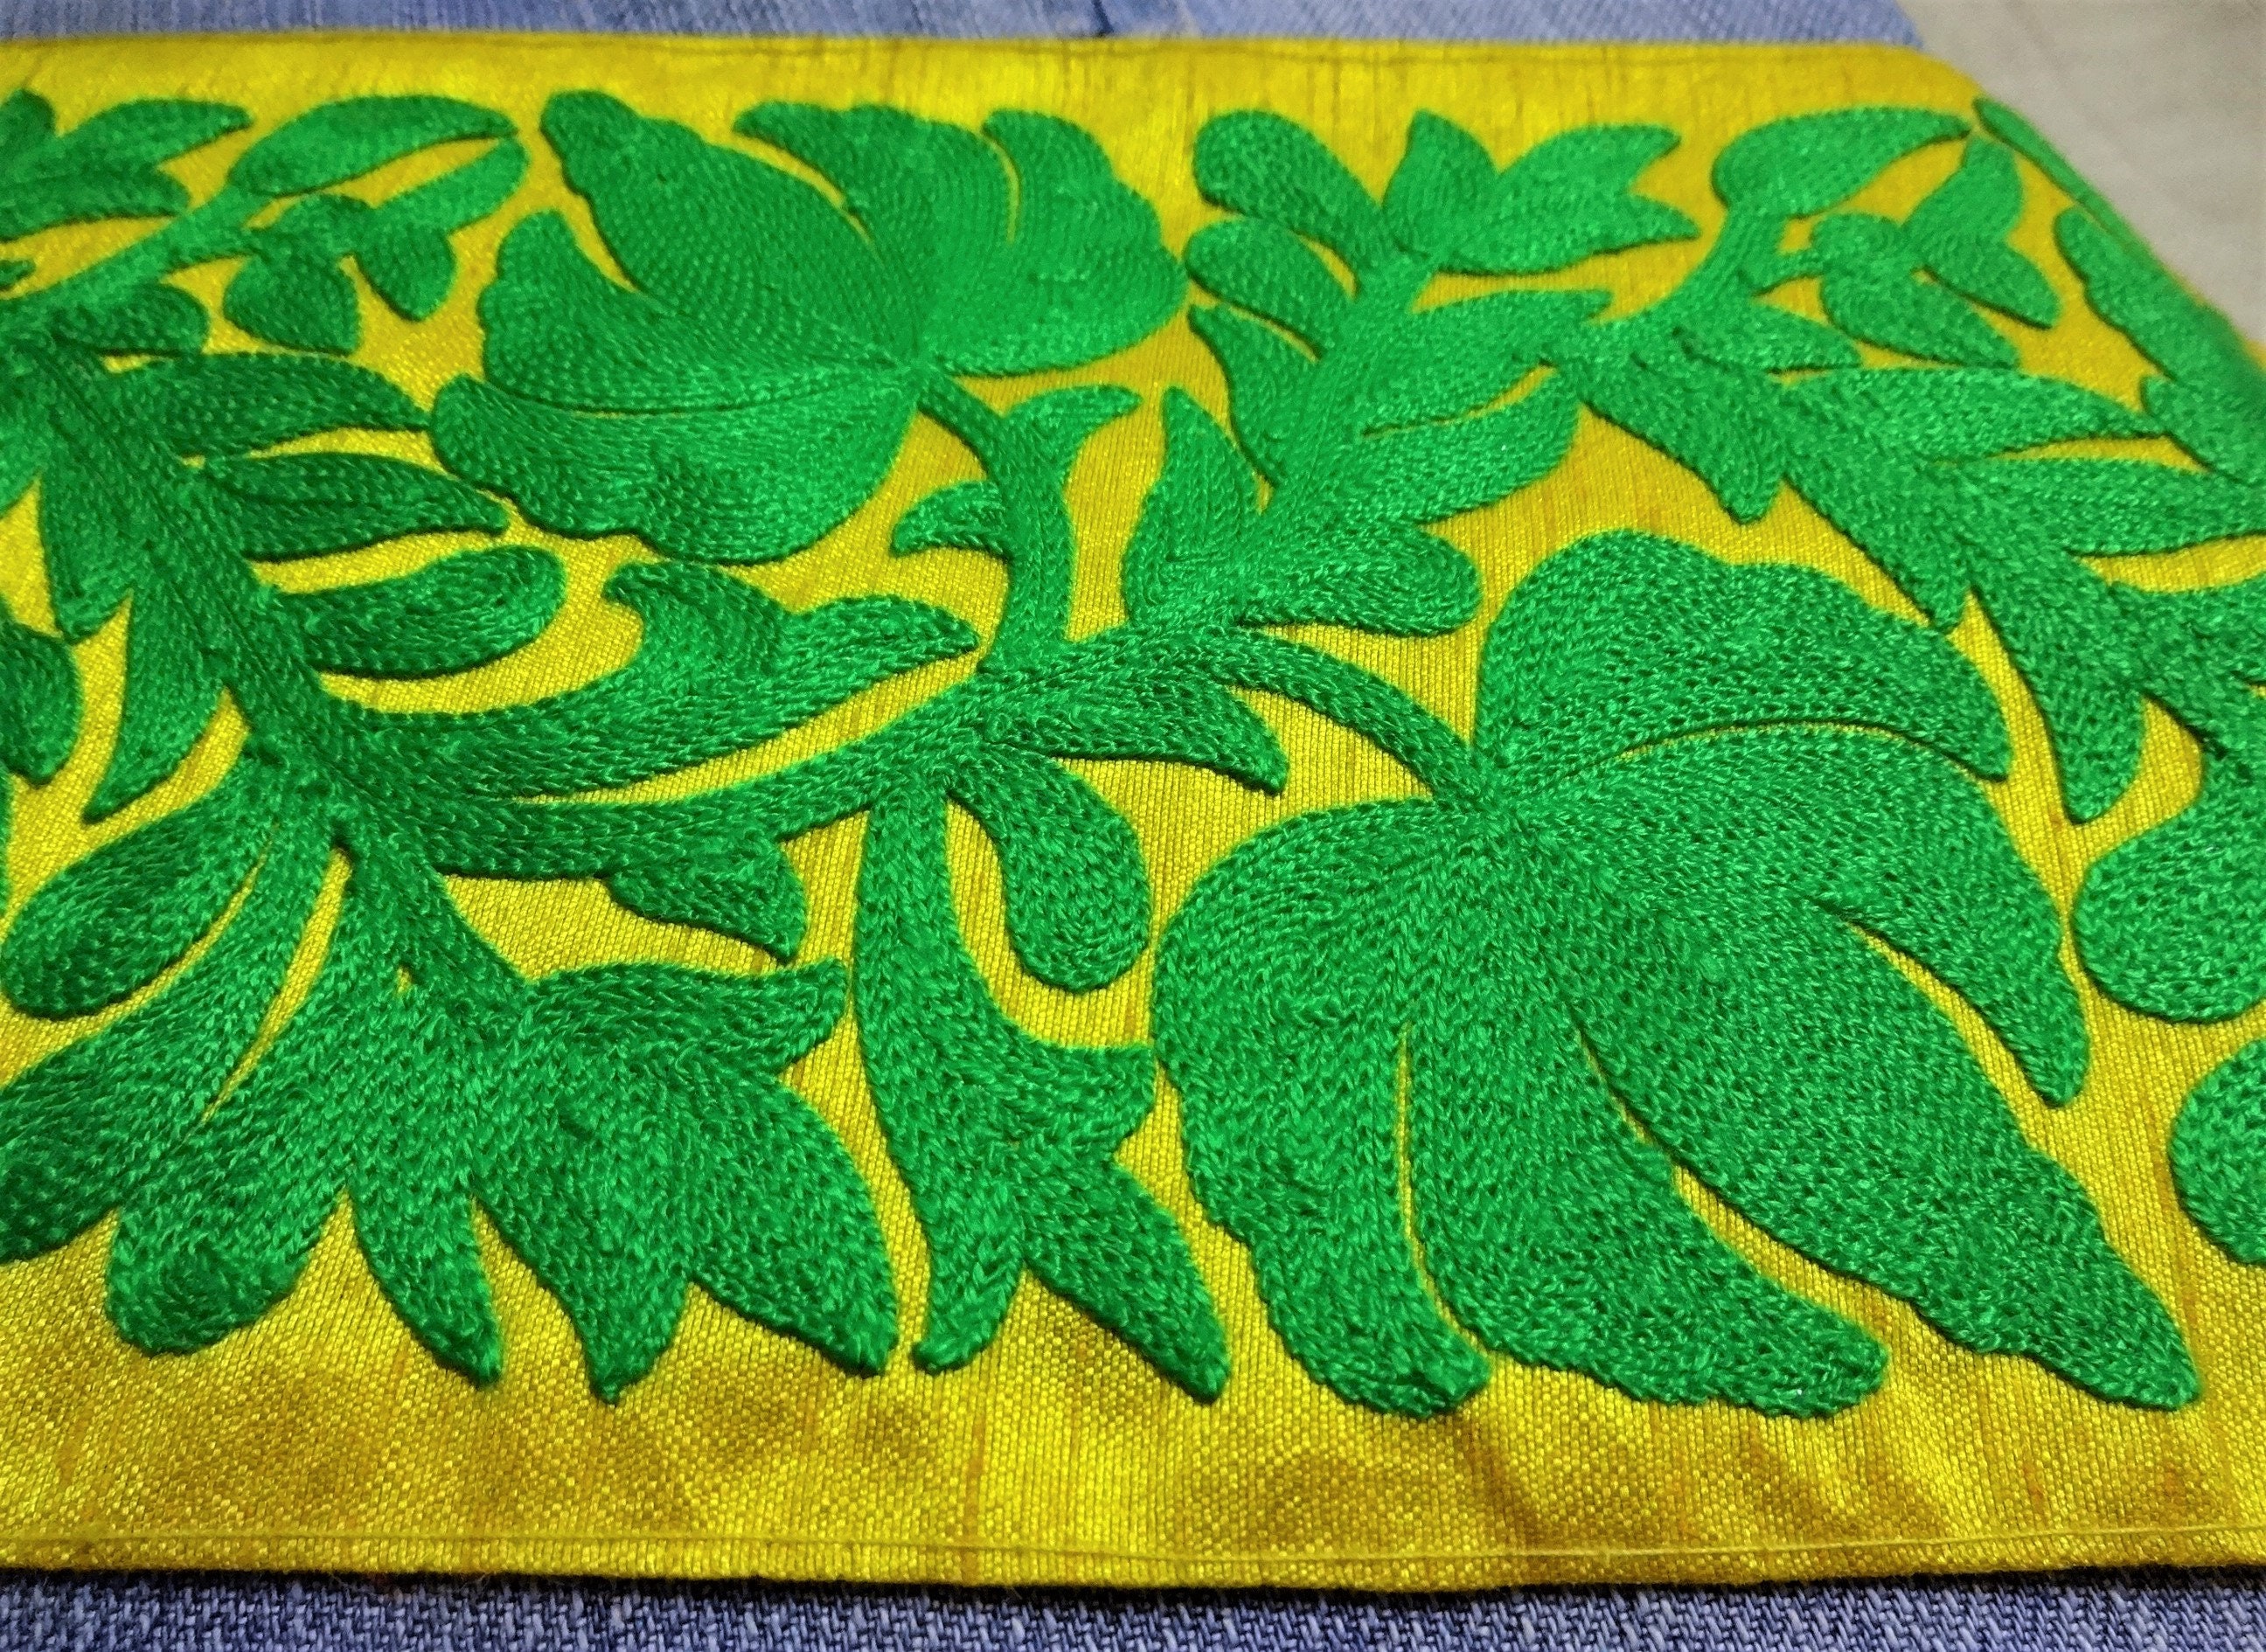 Vintage saree Border Decorative Indian Embroidered Fabric Green Trim 1YD Lace 